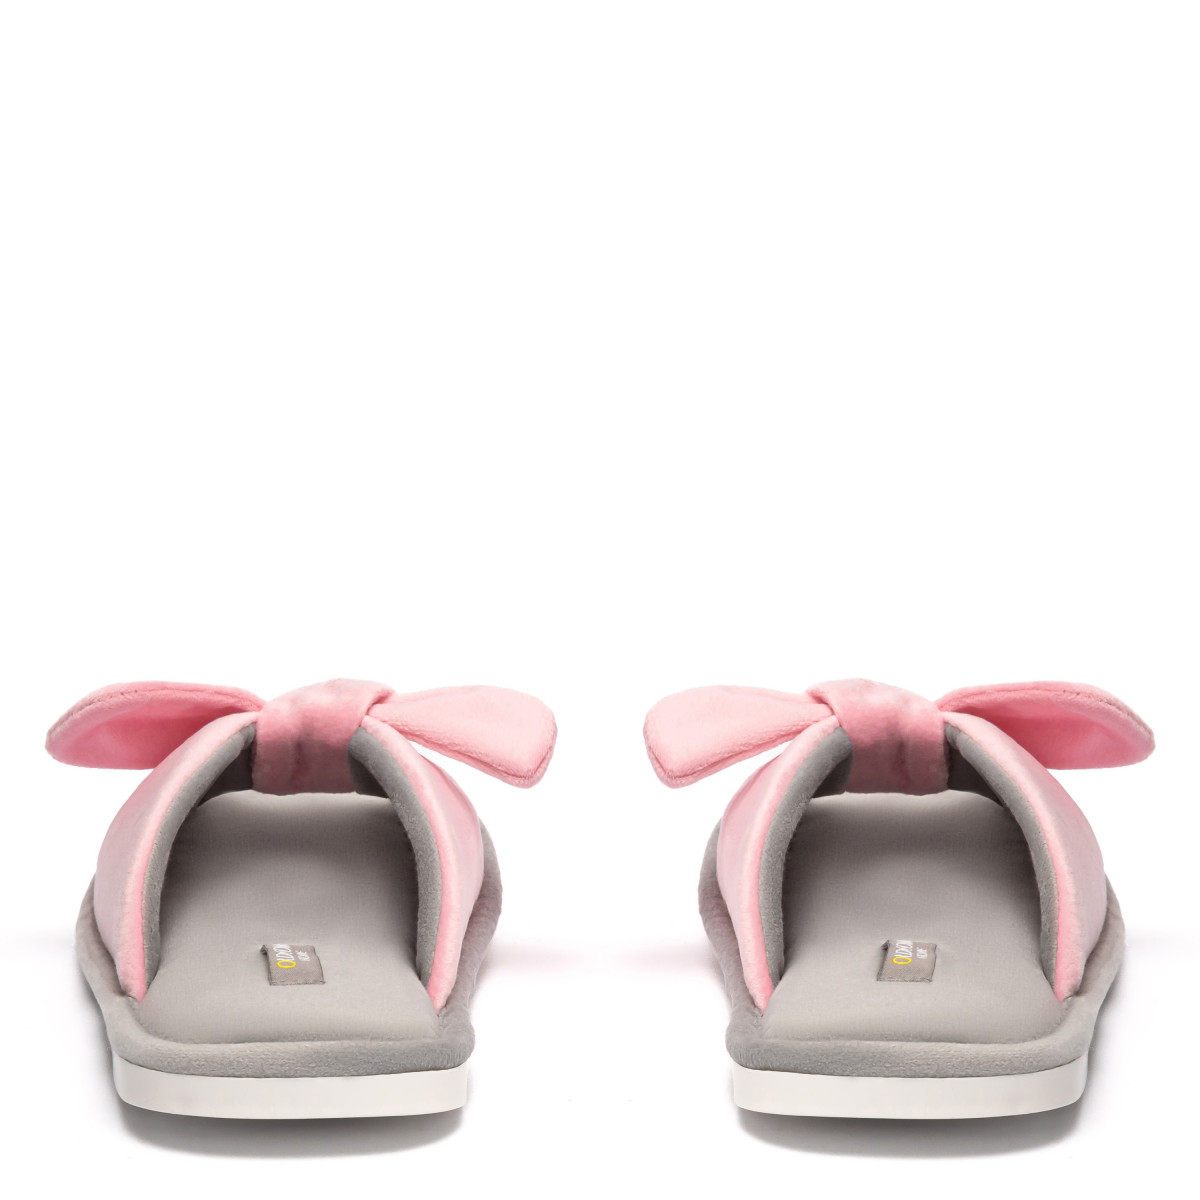 Home slippers BUNNY, Pink / gray